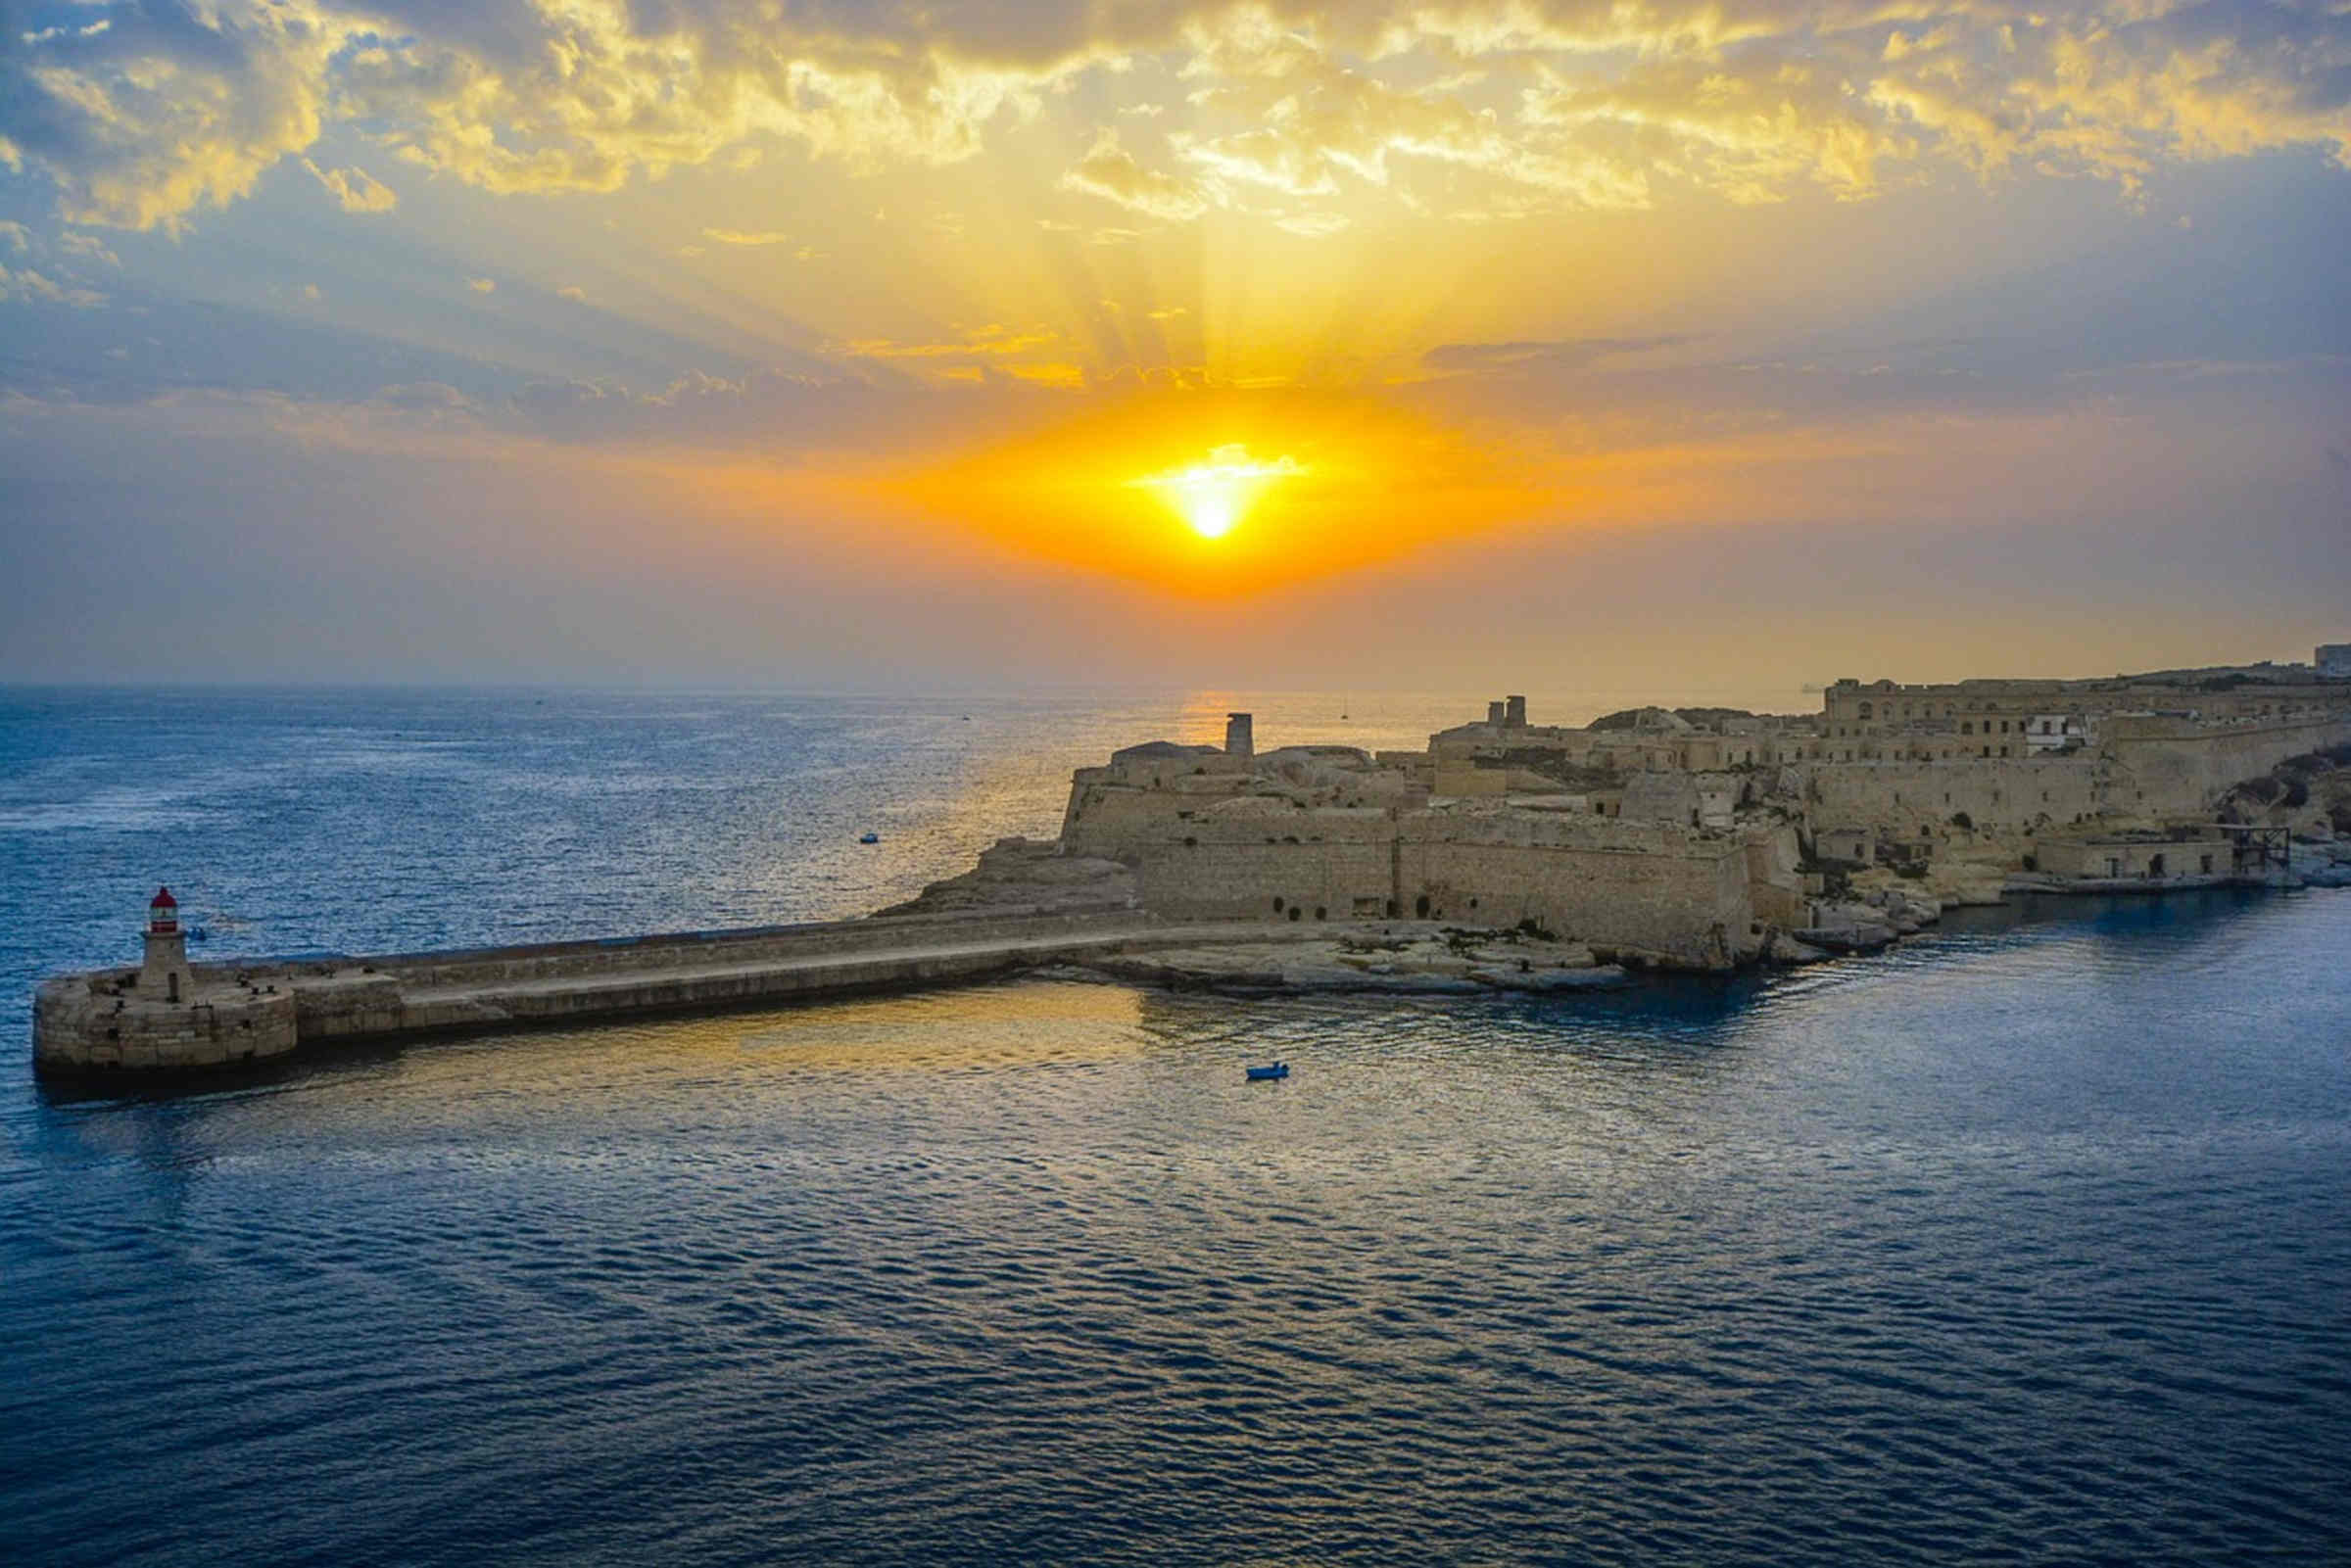 Join us as we explore the locations in Malta that have been used for filming before you plan your trip and visit them yourself!